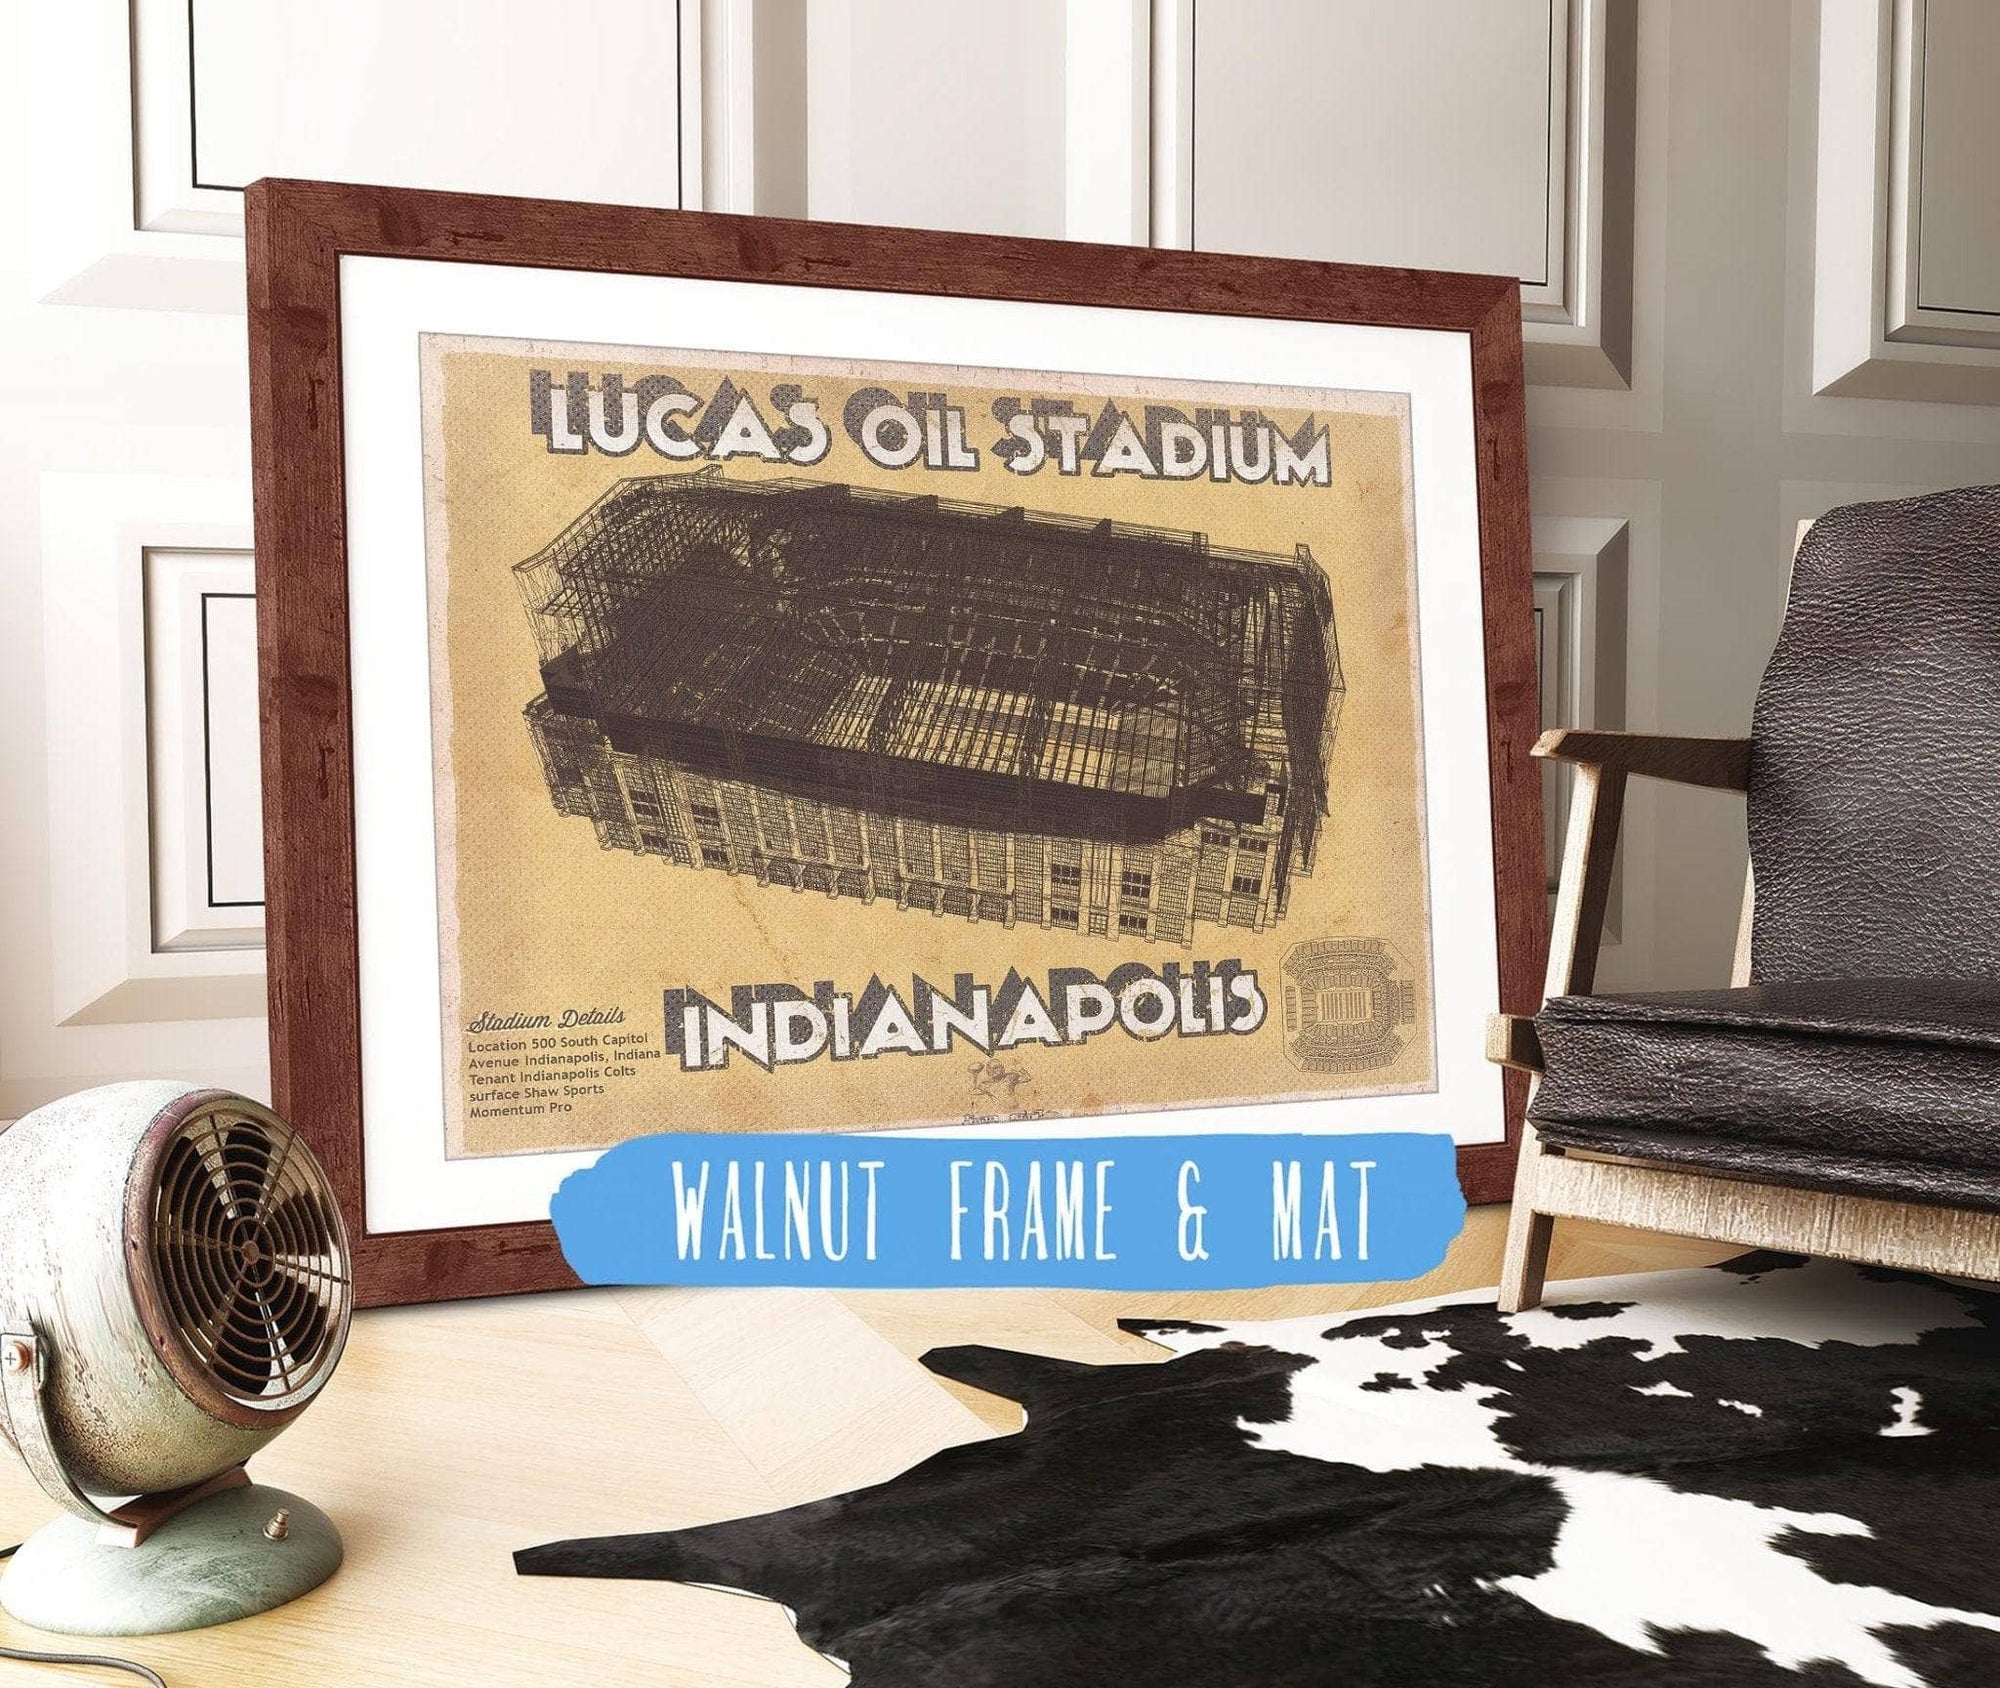 Cutler West Pro Football Collection 14" x 11" / Walnut Frame & Mat Indianapolis Colts Lucas Oil Stadium Vintage Football Print 700666450_64976